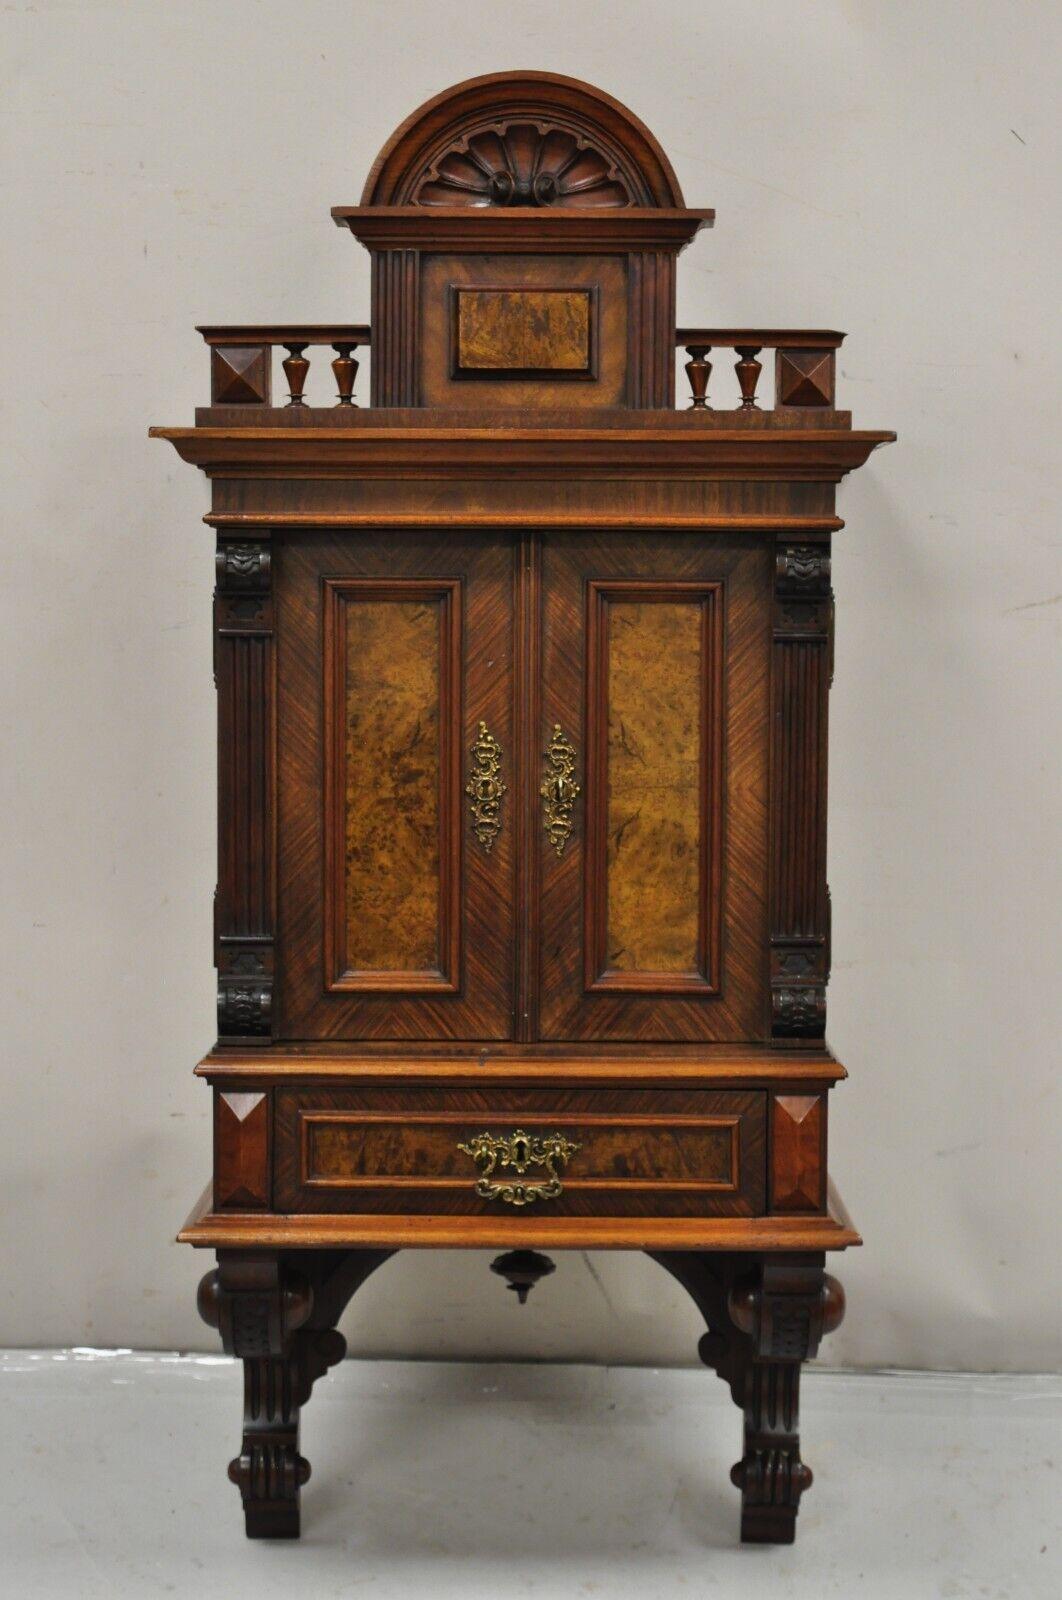 Antique Victorian Burled Walnut Shell Carved Wall Hanging Curio Display Cabinet. Item features one dovetailed drawer, working lock and key, 2 wooden shelves, beautiful wood grain, nicely carved details. Circa 19th Century. Measurements: 46